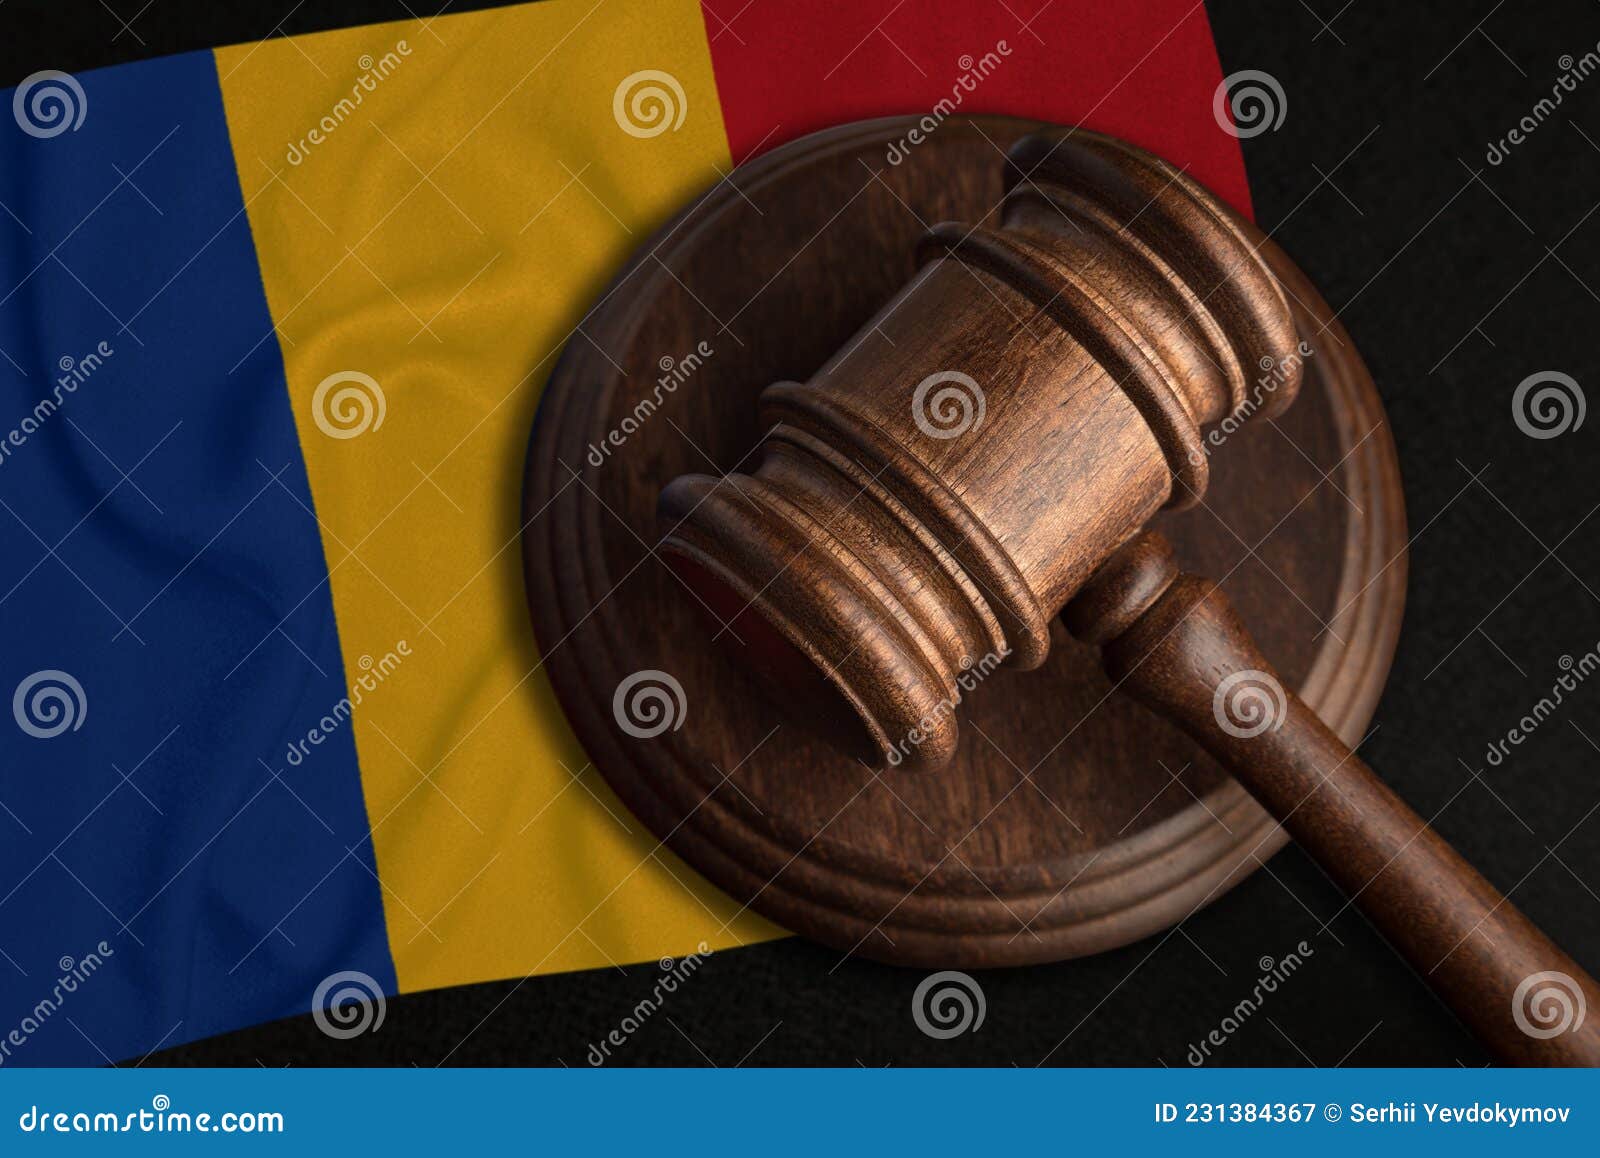 judge gavel and flag of romania. law and justice in romania. violation of rights and freedoms